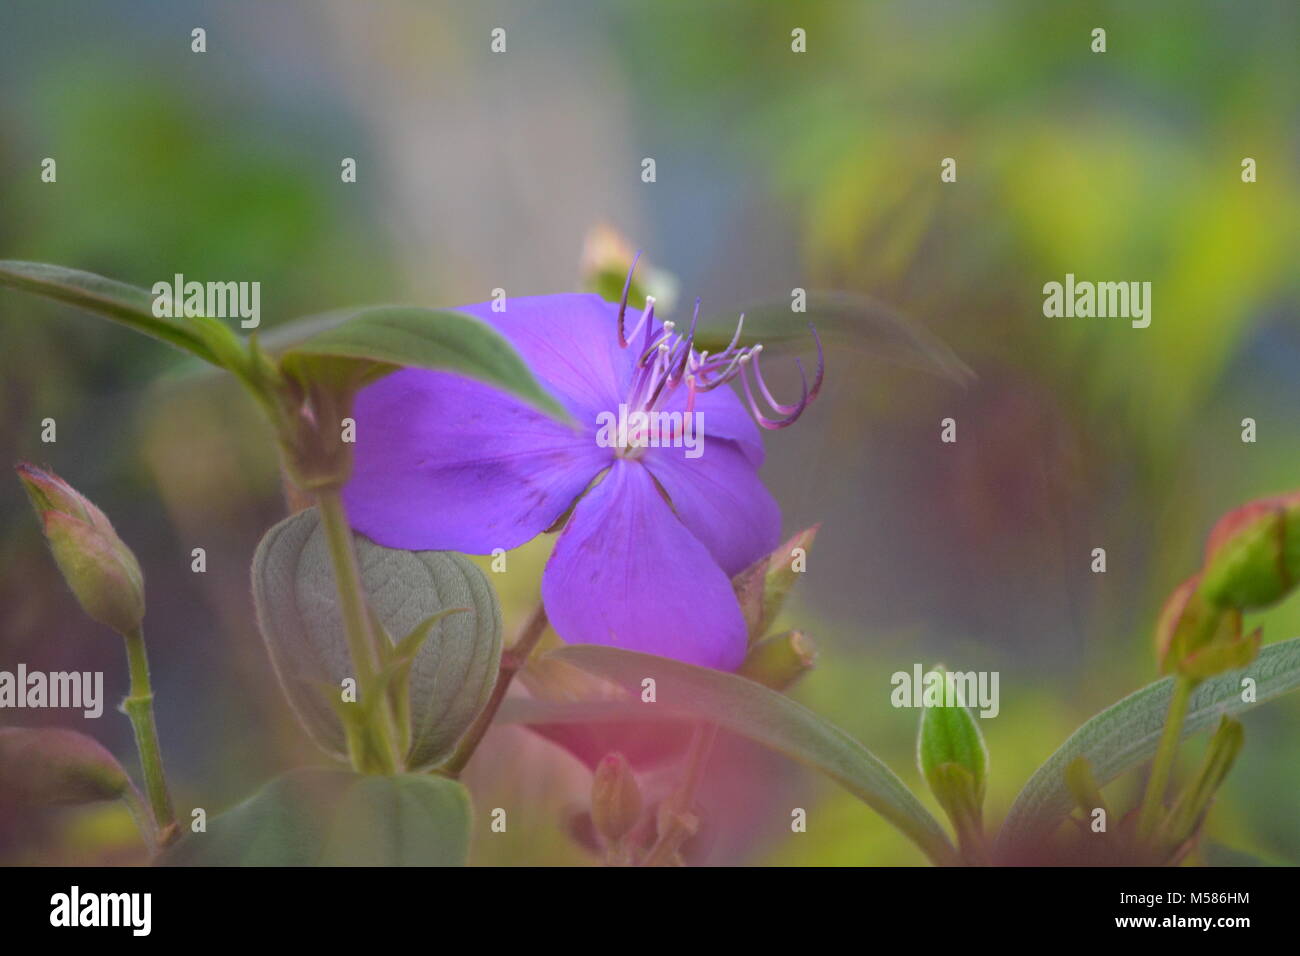 A burst of purple in the garden from this beautiful Tibouchina flower, hazy looking background Stock Photo